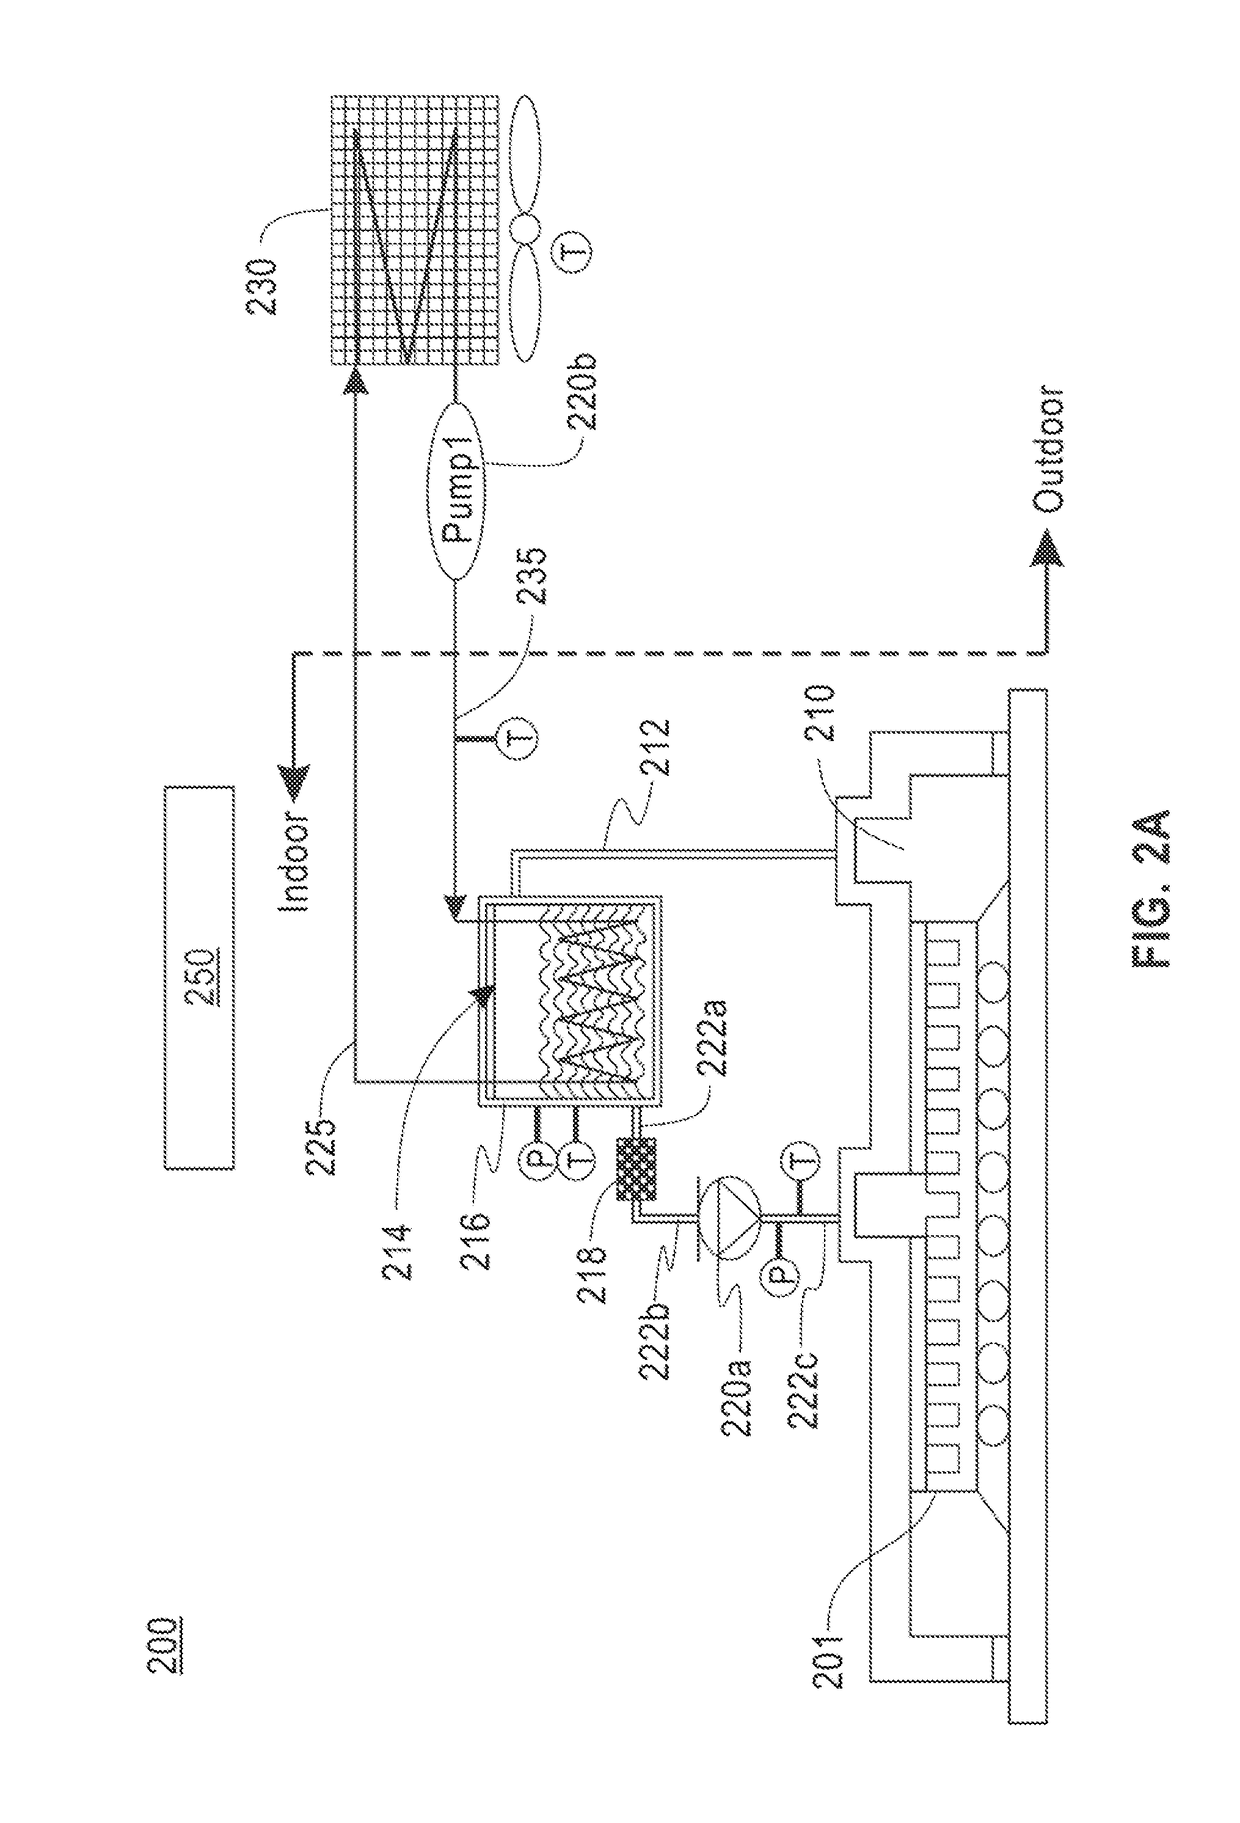 Two-phase cooling with ambient cooled condensor